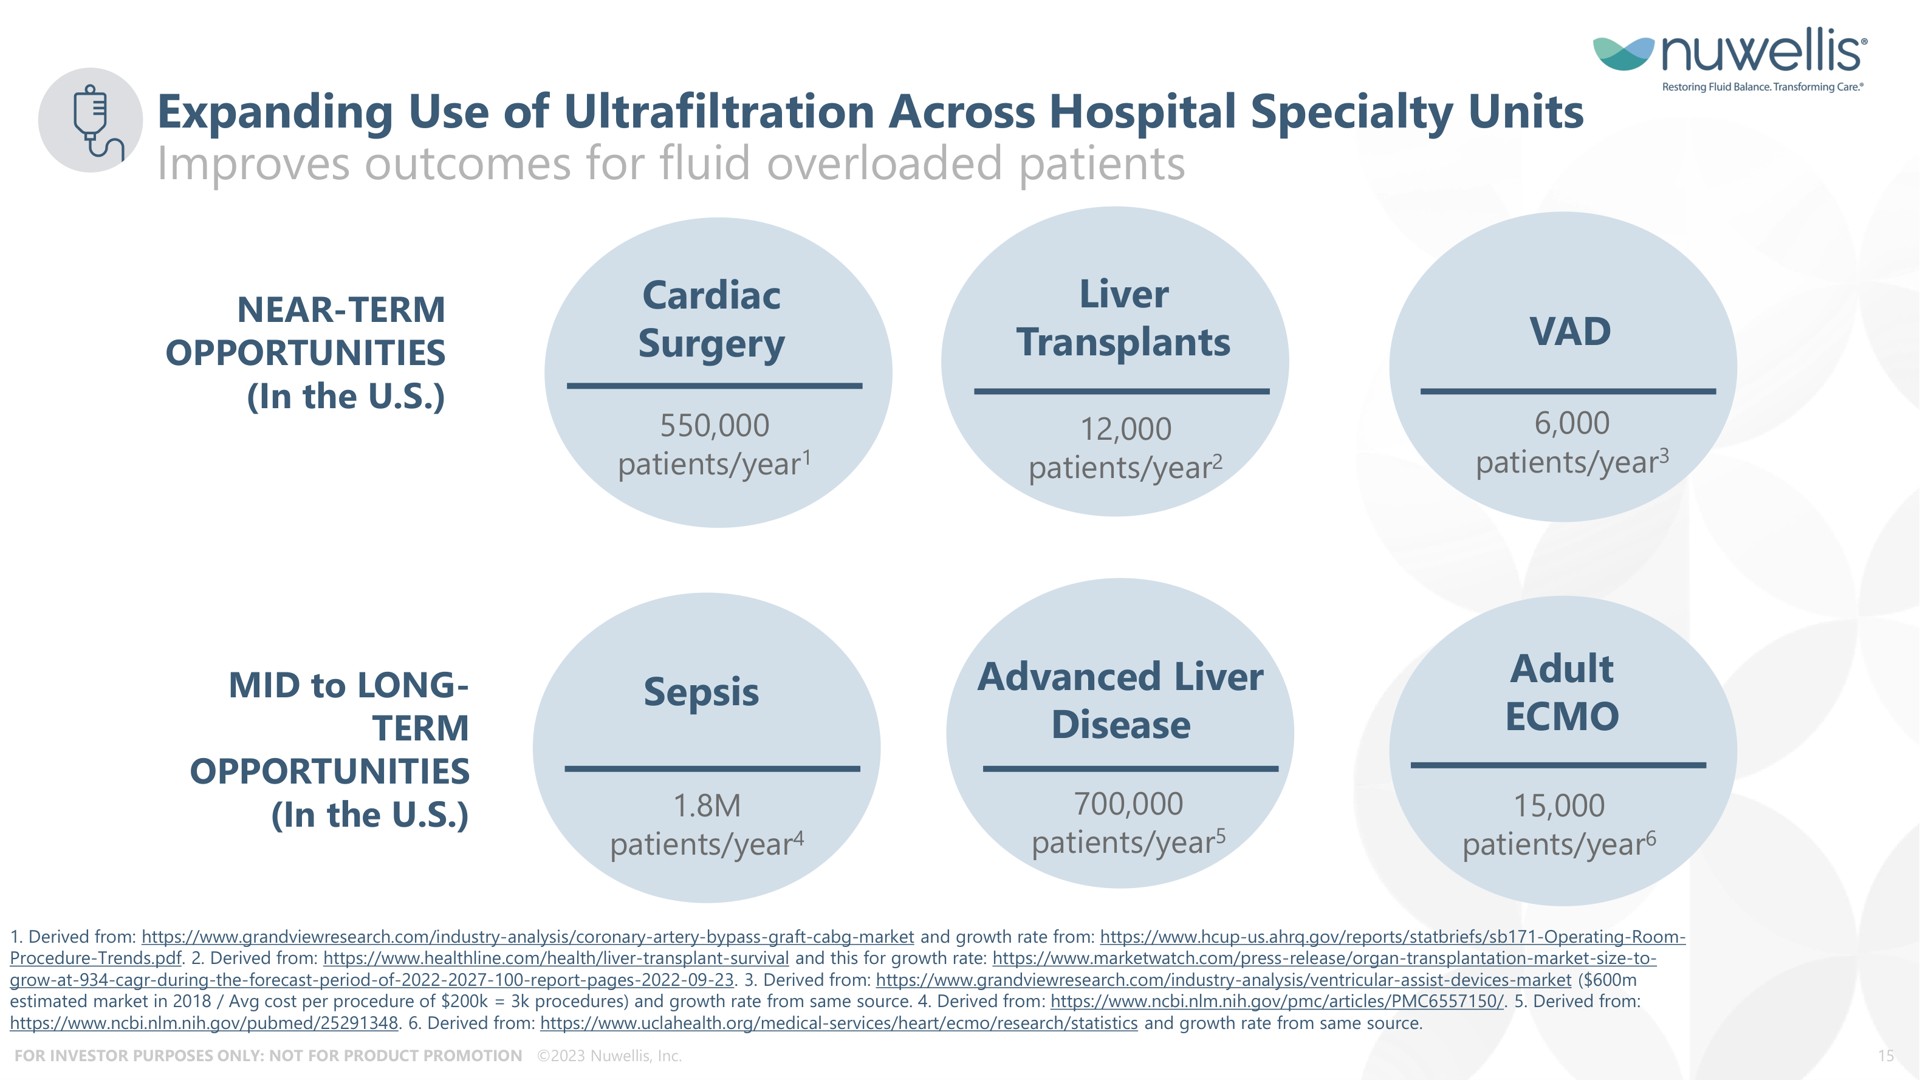 expanding use of ultrafiltration across hospital specialty units improves outcomes for fluid overloaded patients surgery transplants mid to long term sane psis advanced liver disease adult | Nuwellis